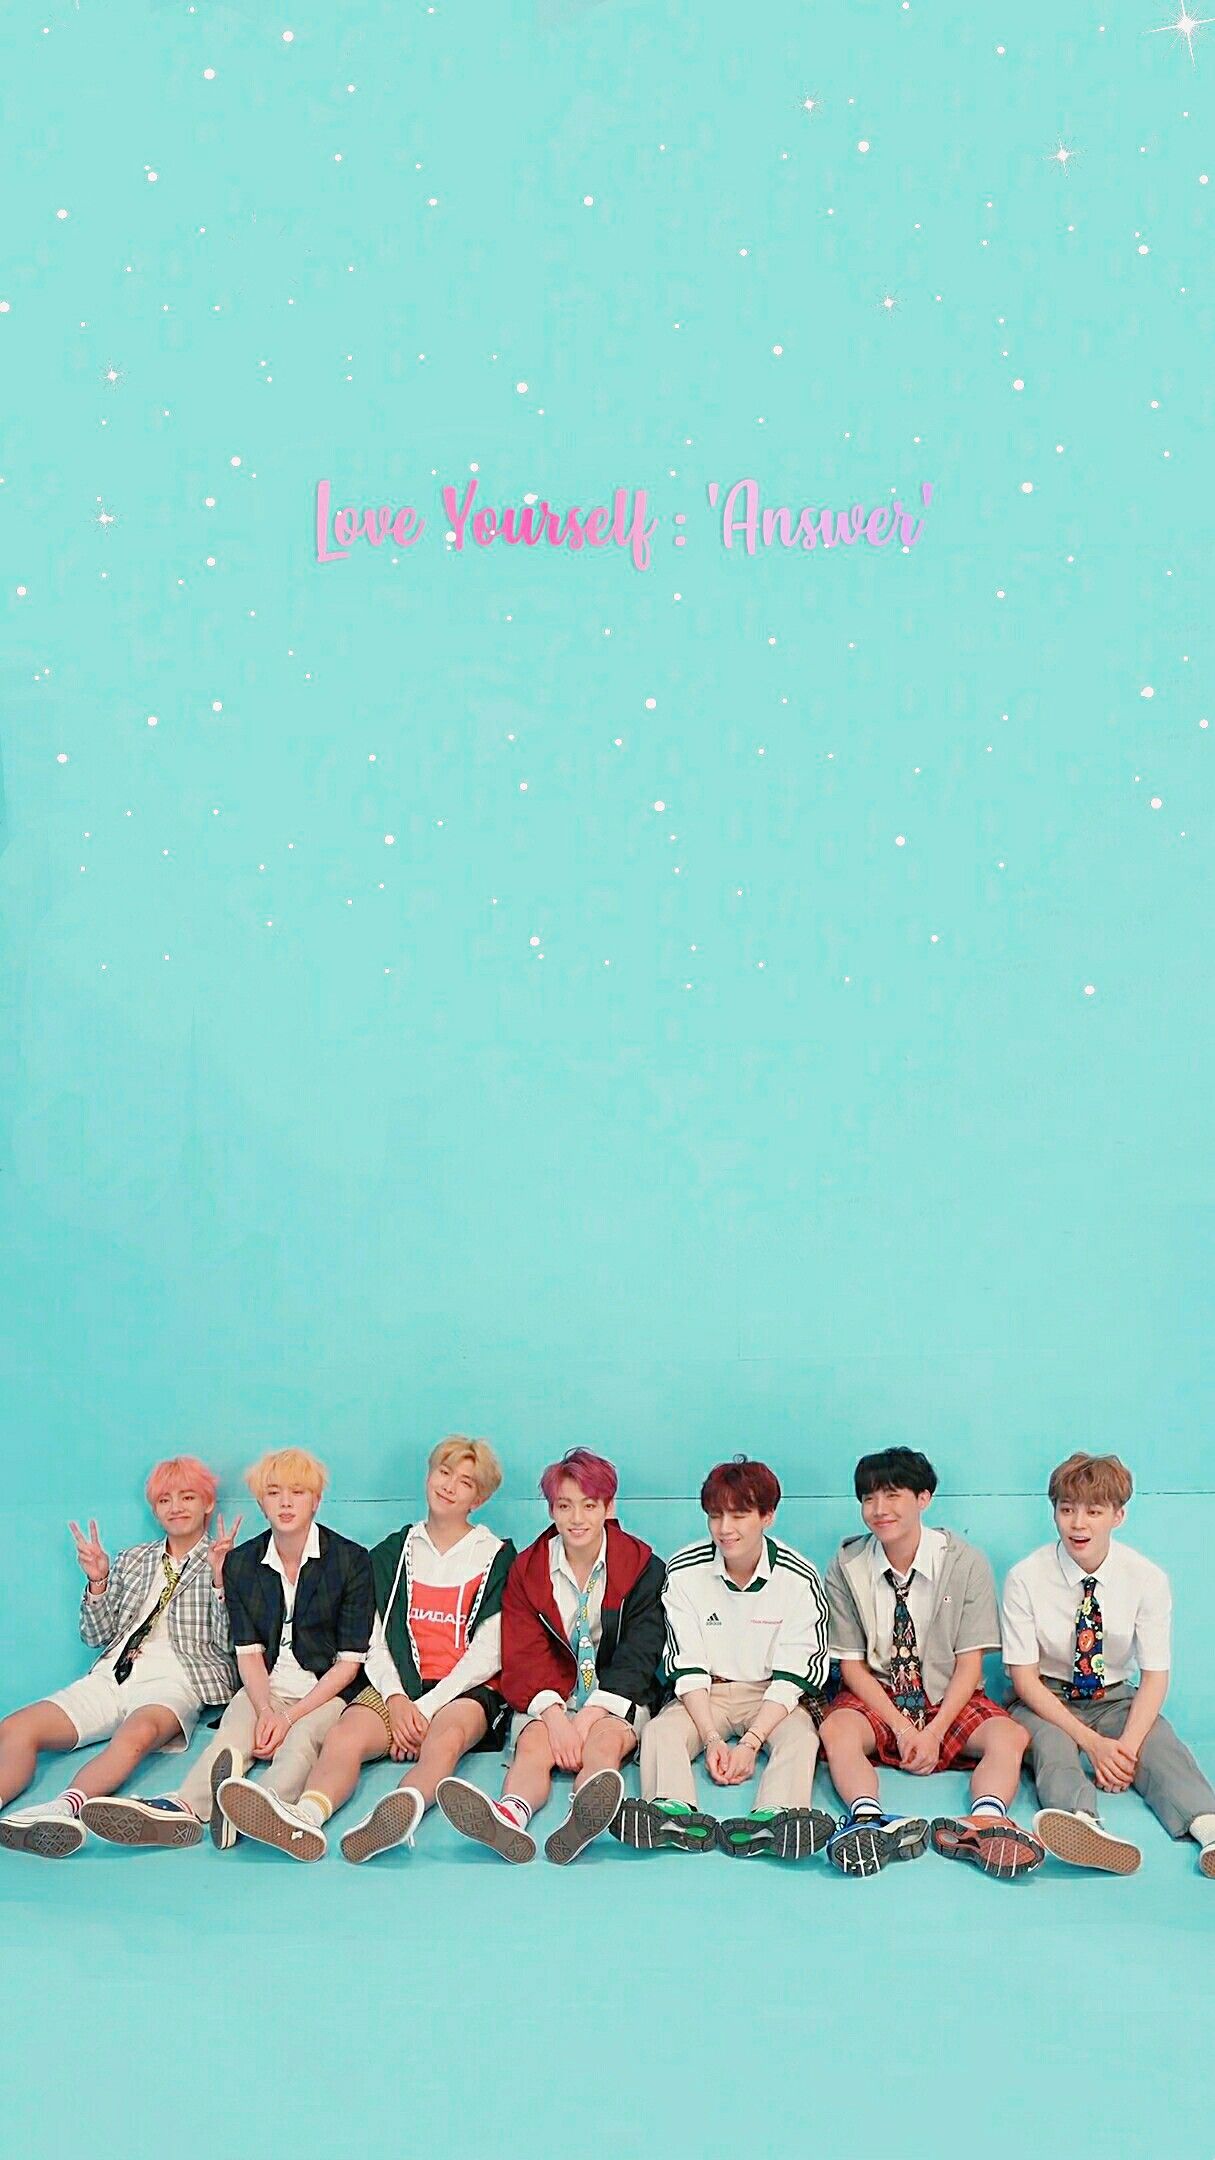 Love Yourself Answer BTS Wallpapers on WallpaperDog